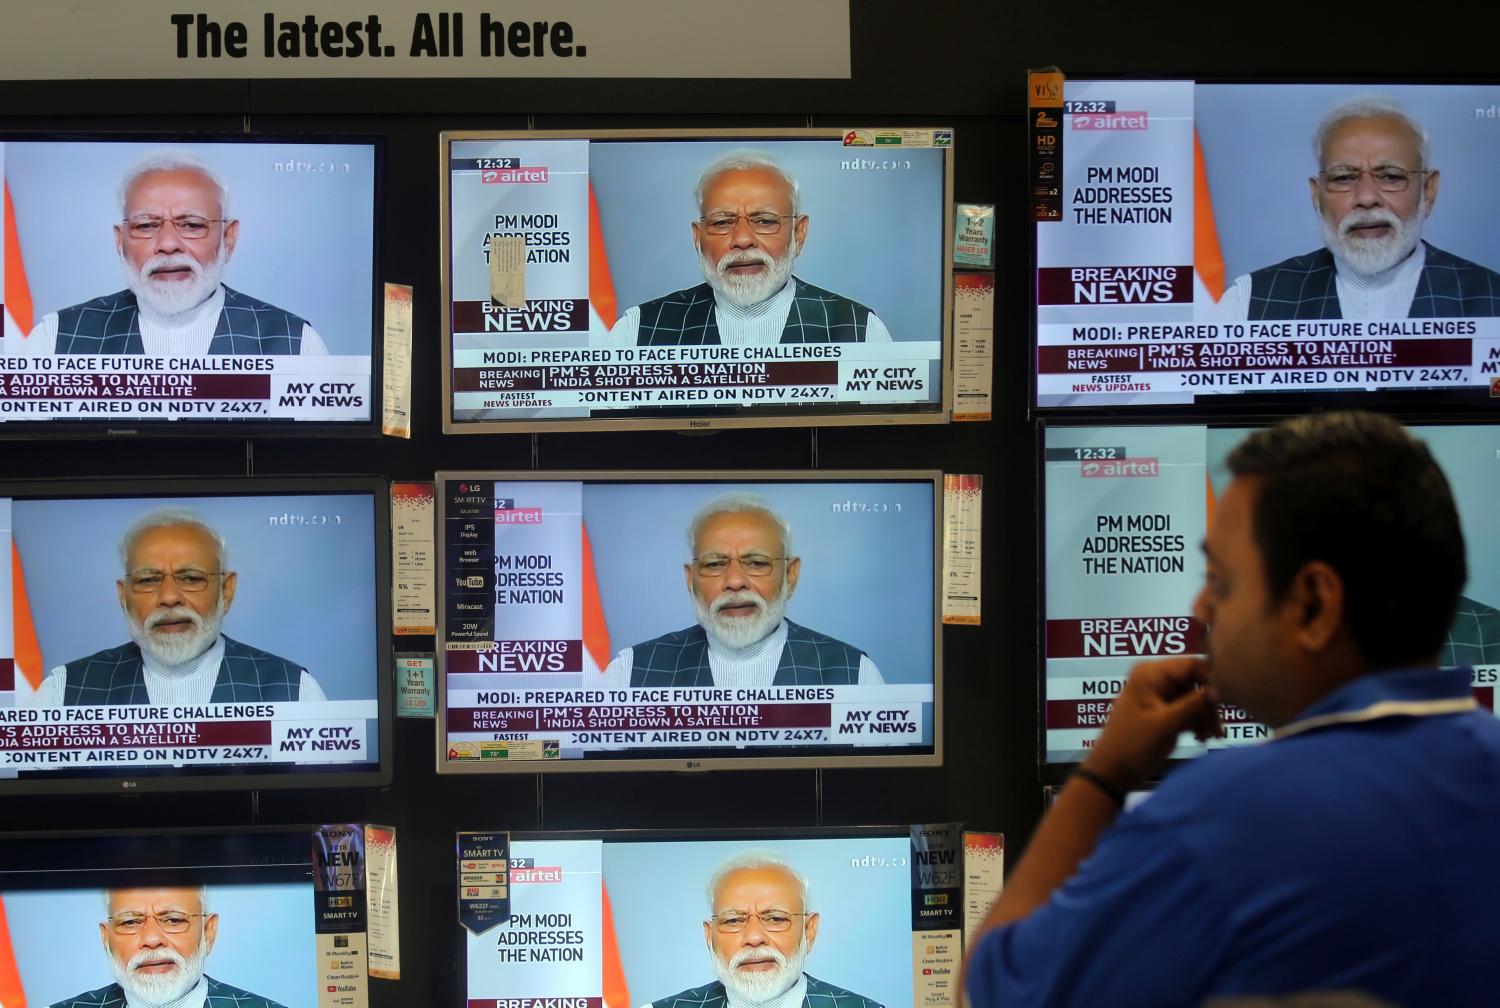 A man watches Prime Minister Narendra Modi addressing to the nation, on TV screens inside a showroom in Mumbai, India, March 27, 2019. REUTERS/Francis Mascarenhas - RC1B207CBD20